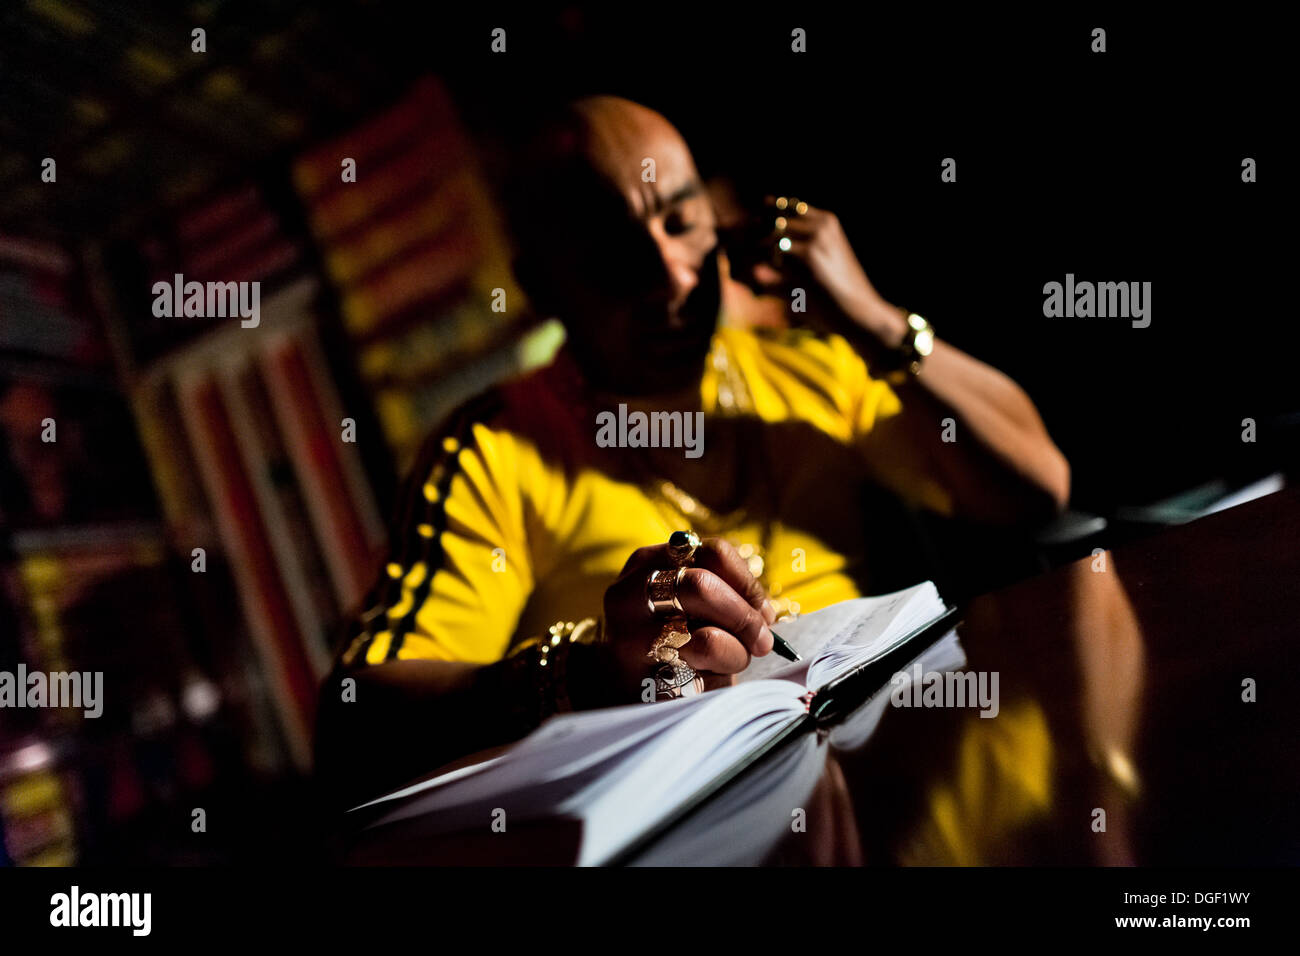 A Colombian ‘brujo’ calling himself Shaman Llanero, provides consultation over the phone in his office in Bogota, Colombia. Stock Photo